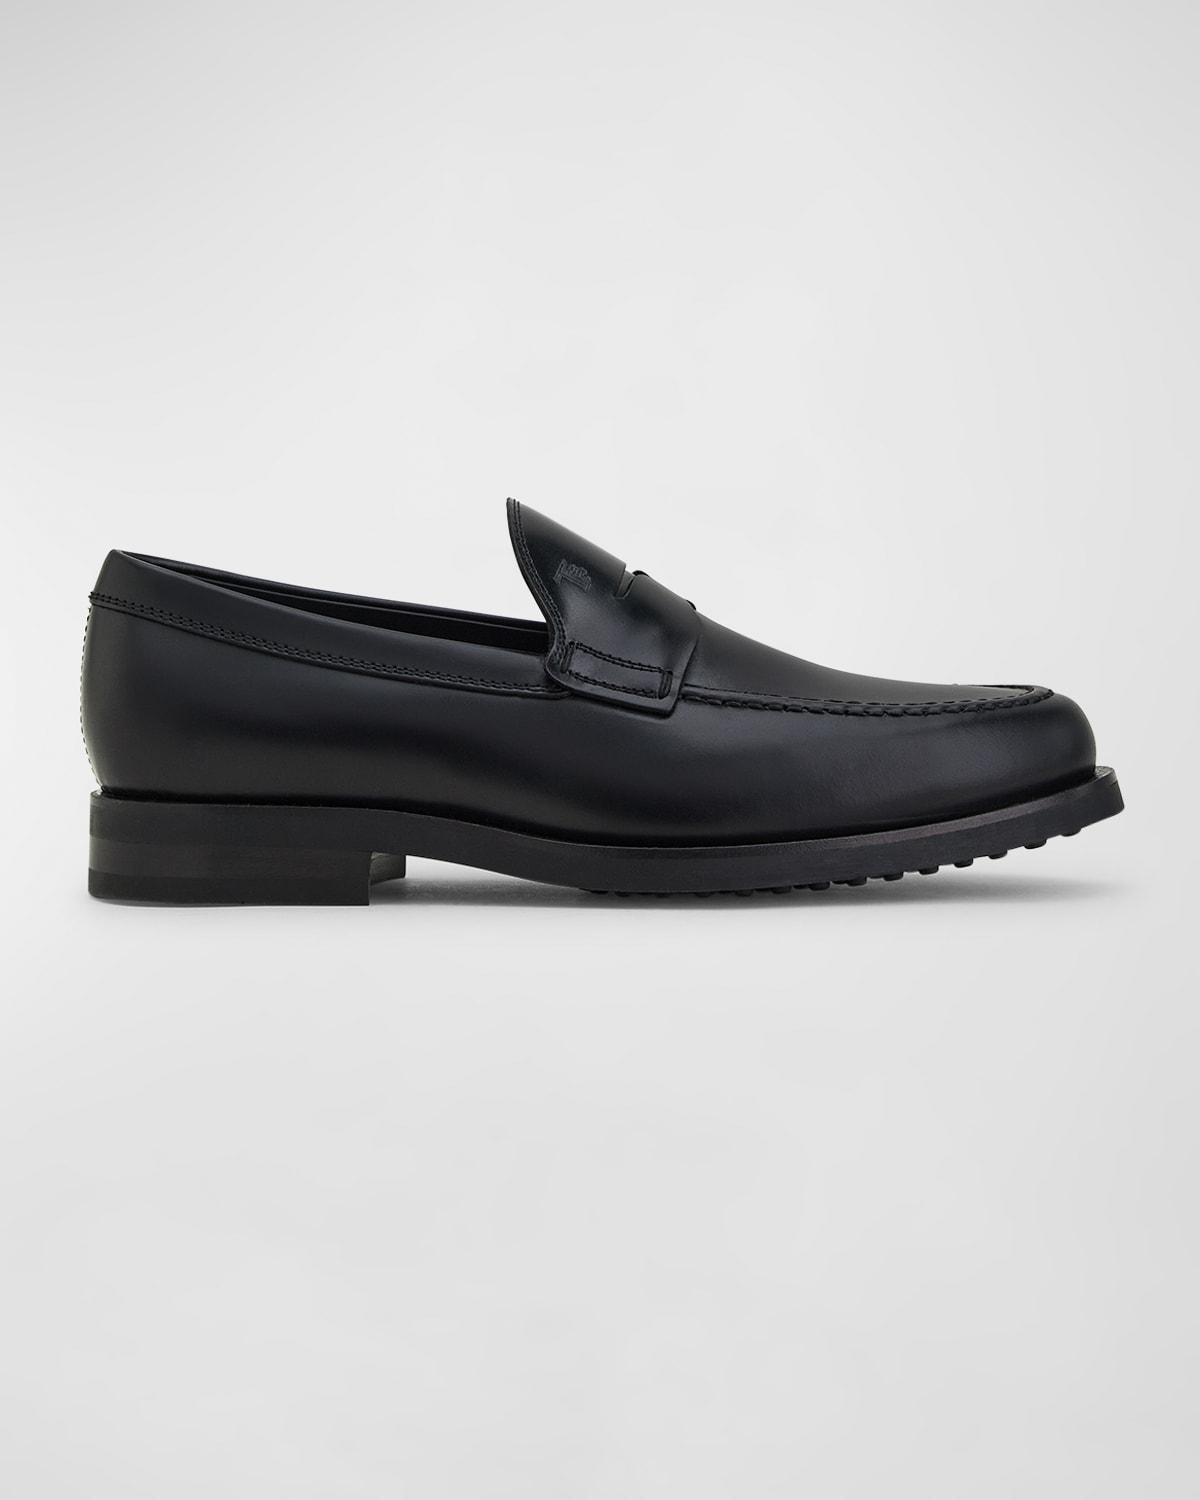 Tods Formale Penny Loafer Product Image